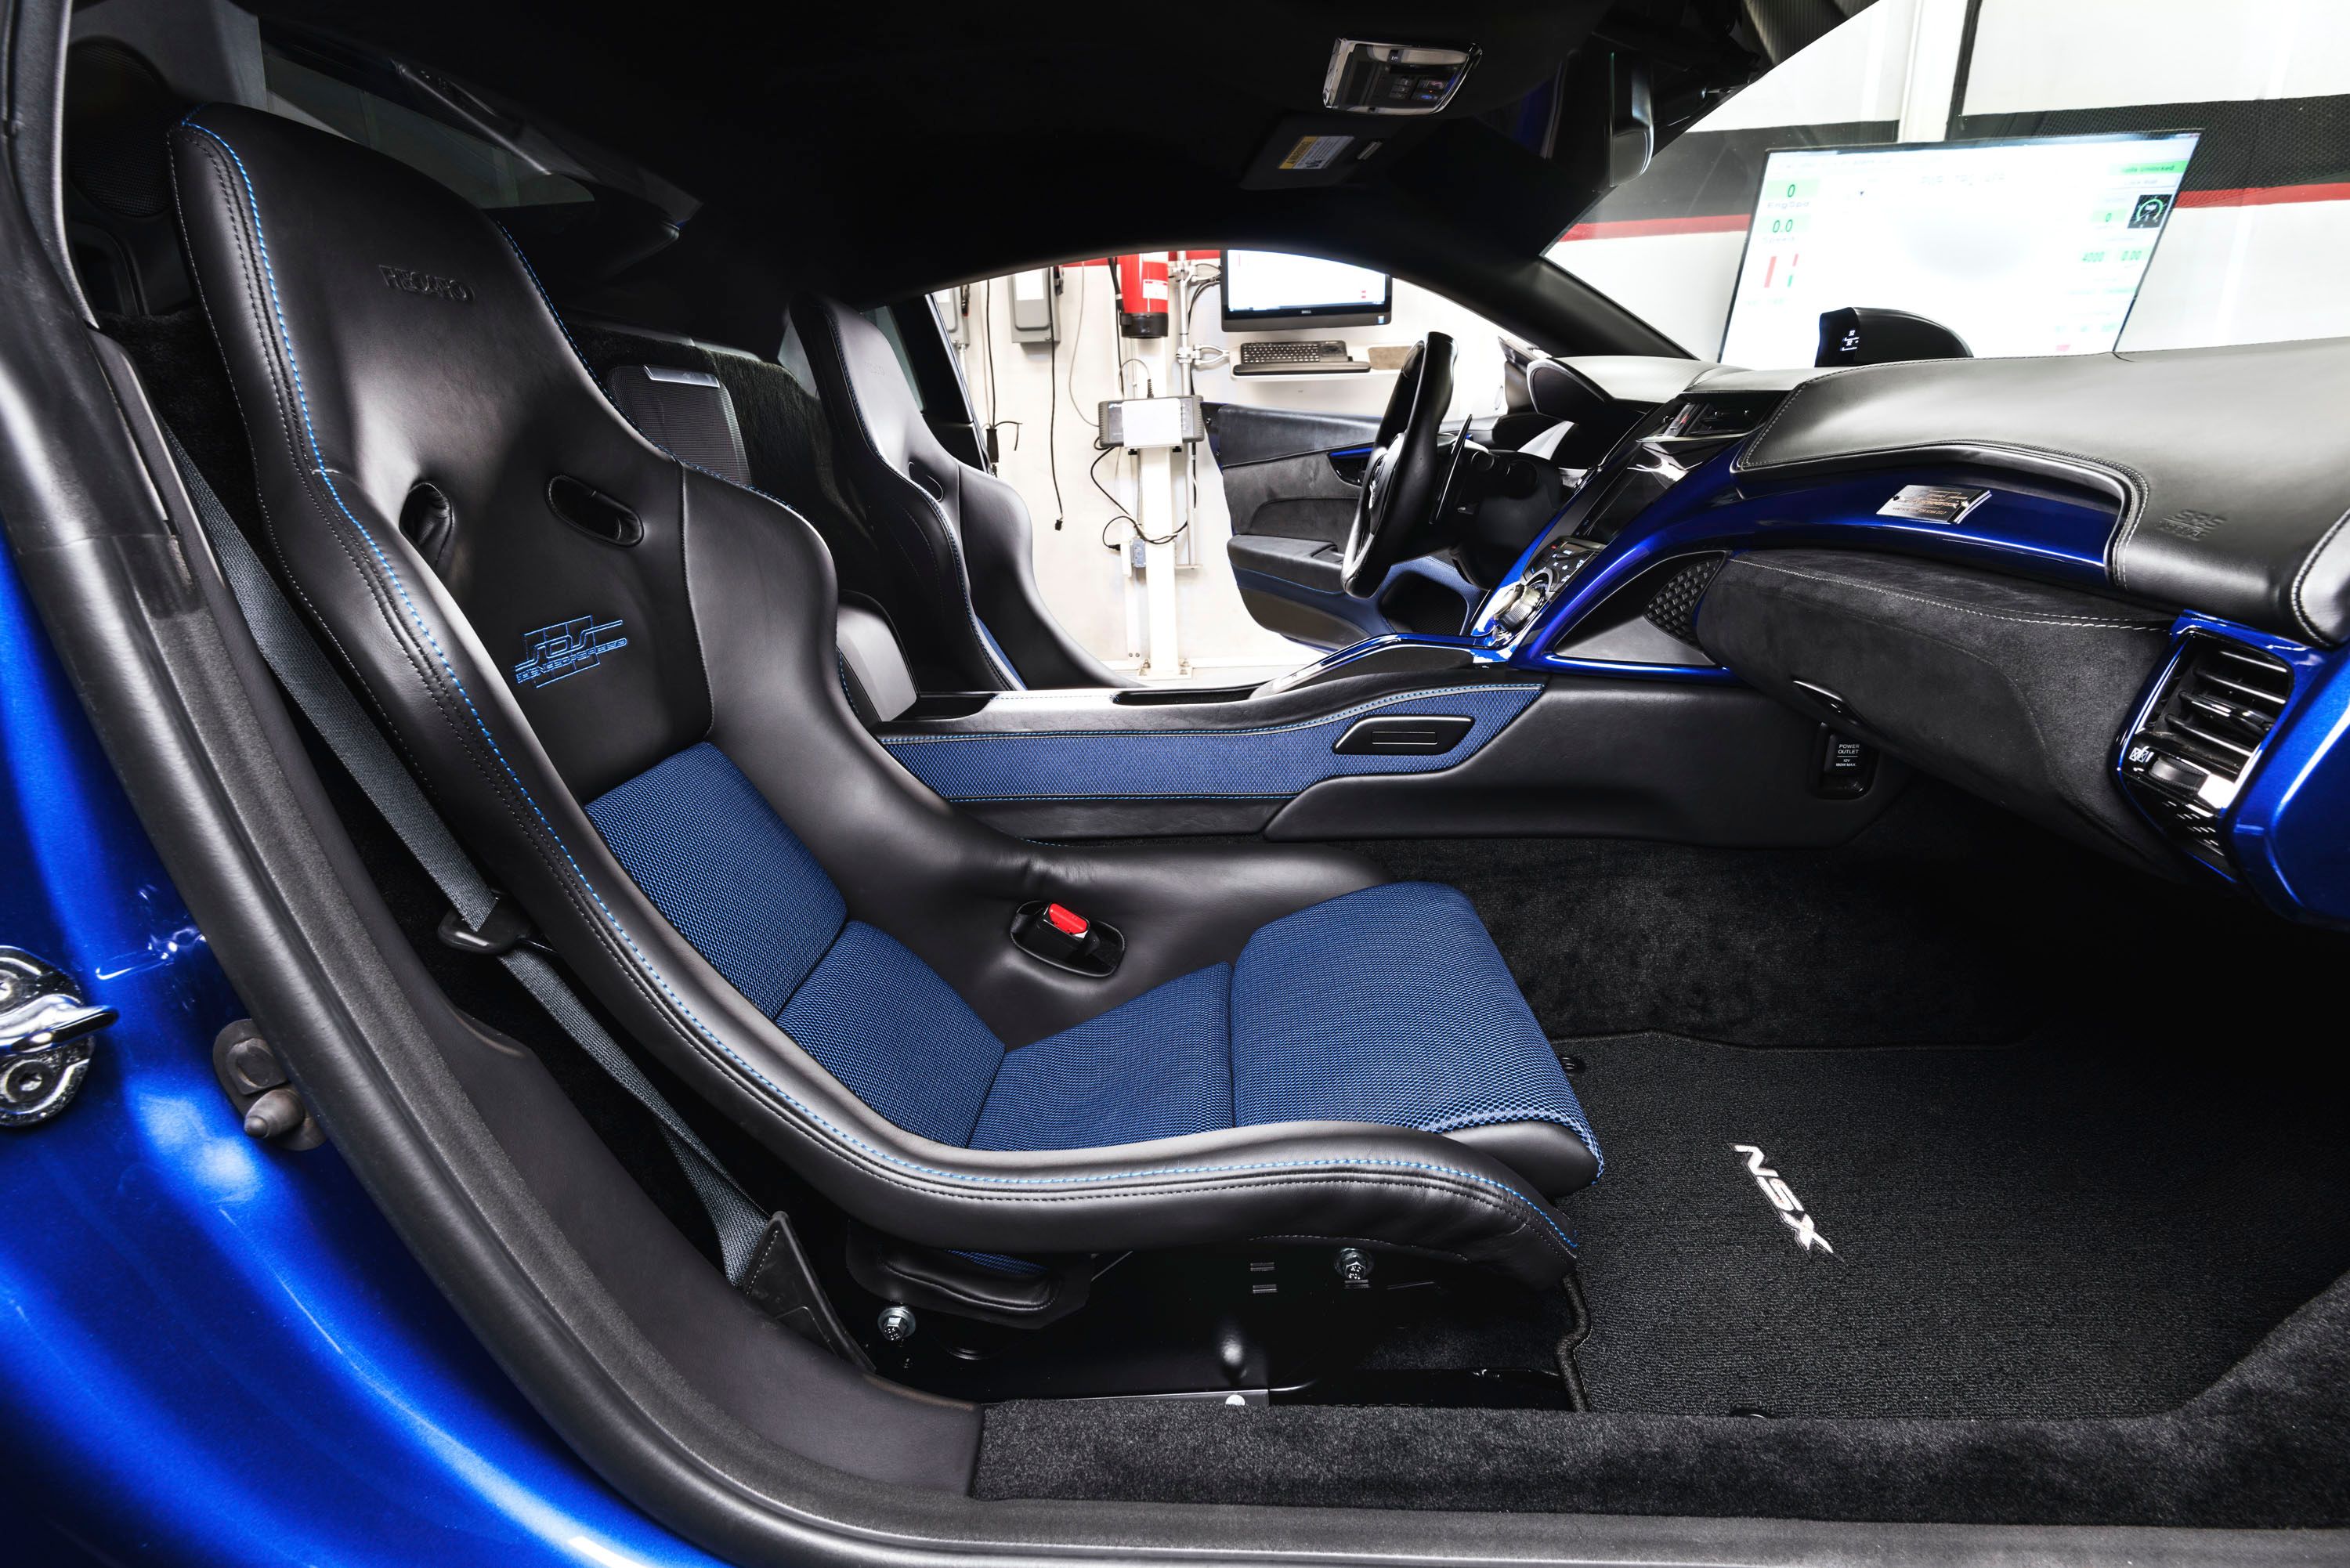 Recaro Pole Position ABE seats wrapped in leather & blue fabric